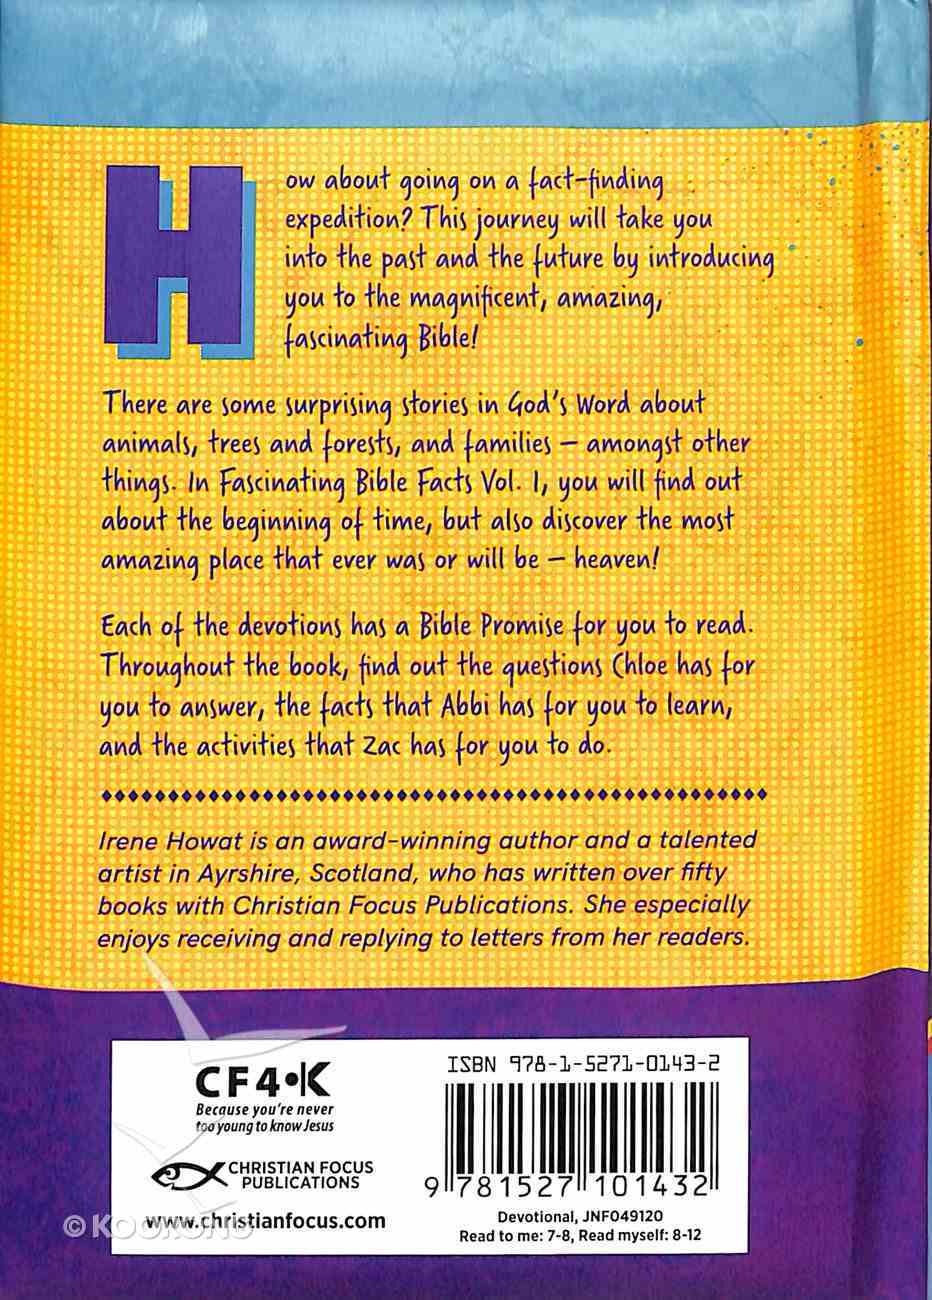 Fascinating Bible Facts 103 Devotions (Volume 1) (Fascinating Bible Facts Series) Hardback